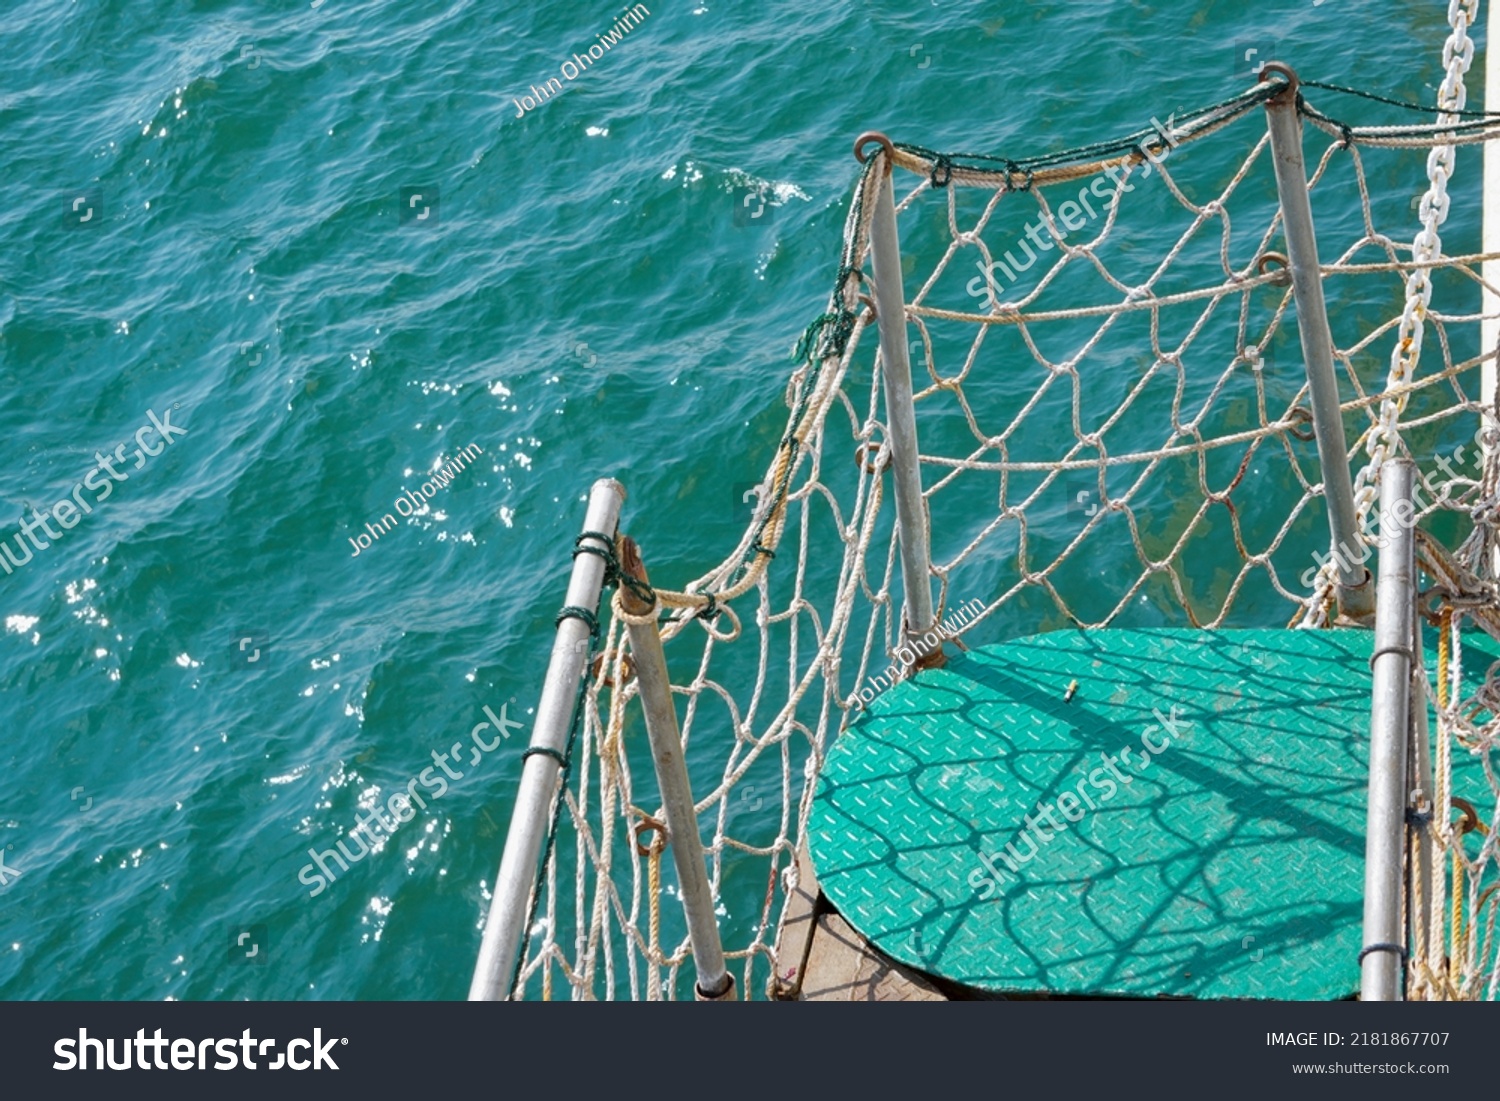 Stairs or walkways on passenger ships which are fenced with nets to maintain the safety of passengers. This photo is just right for shipping safety needs etc.                 #2181867707